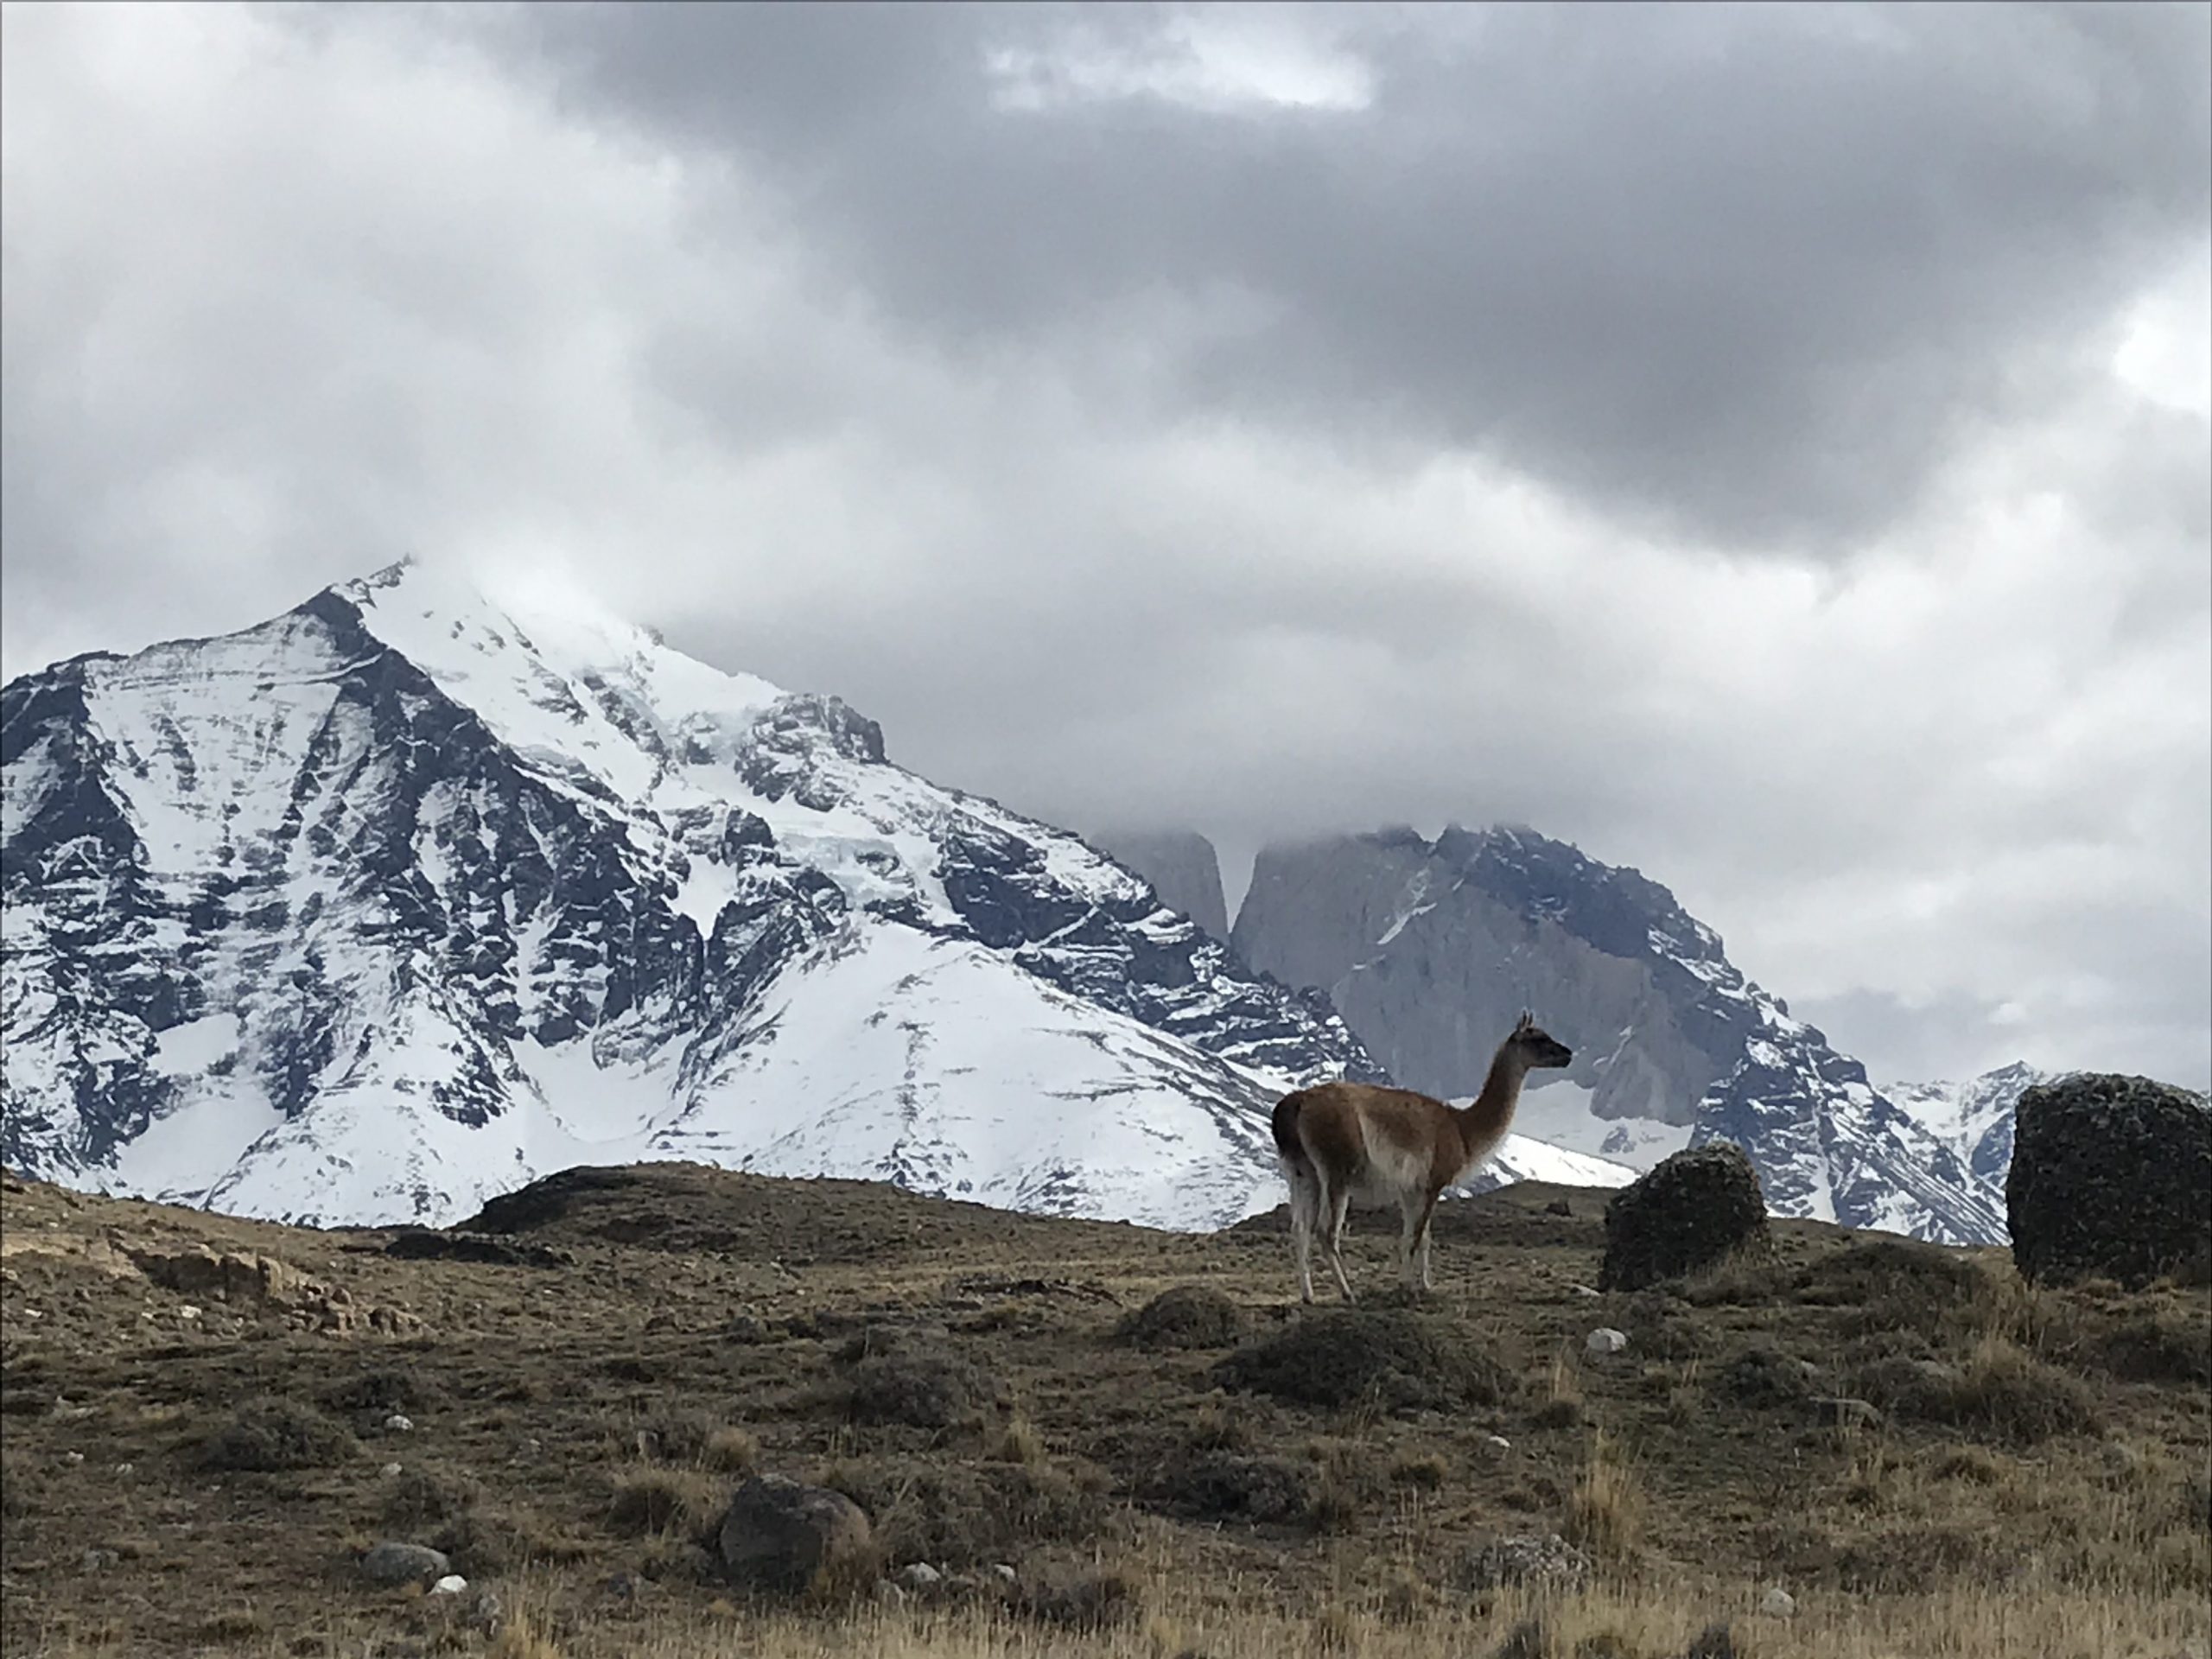 Gaynor spots a Guanaco on a hike in Patagonia 